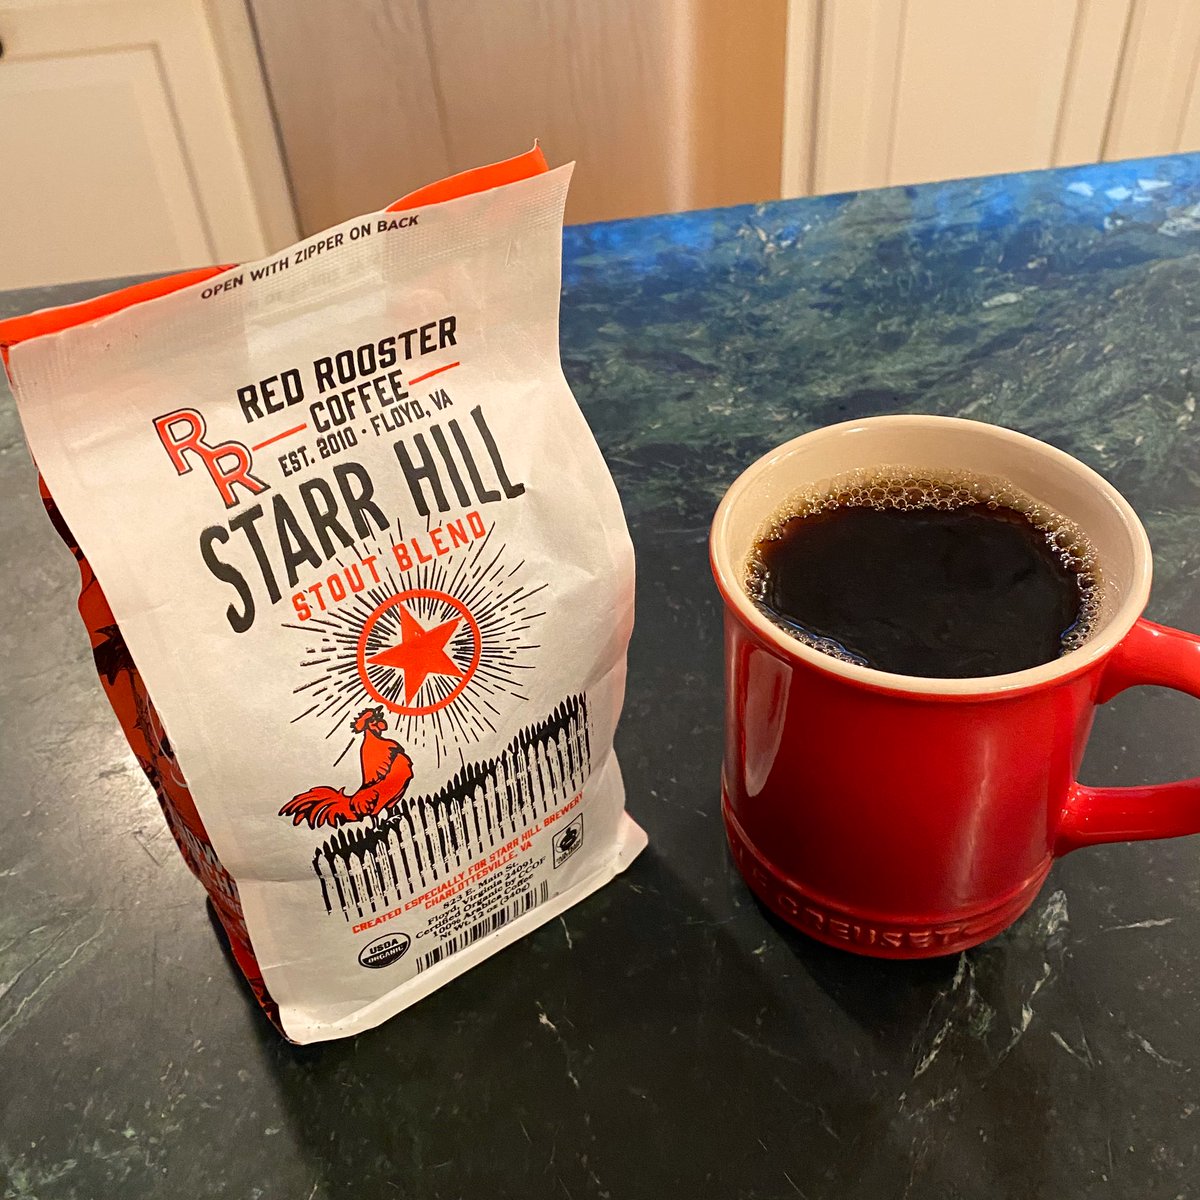 Red Rooster Coffee Starr Hill Stout BlendThis excellent blend with notes of chocolate was a surprise mailbox drop from a local coffee fairy (thanks  @kellyfaircloth!). It’s wonderful with a splash of milk, which brings out some sweetness. I’d love to try more from them!